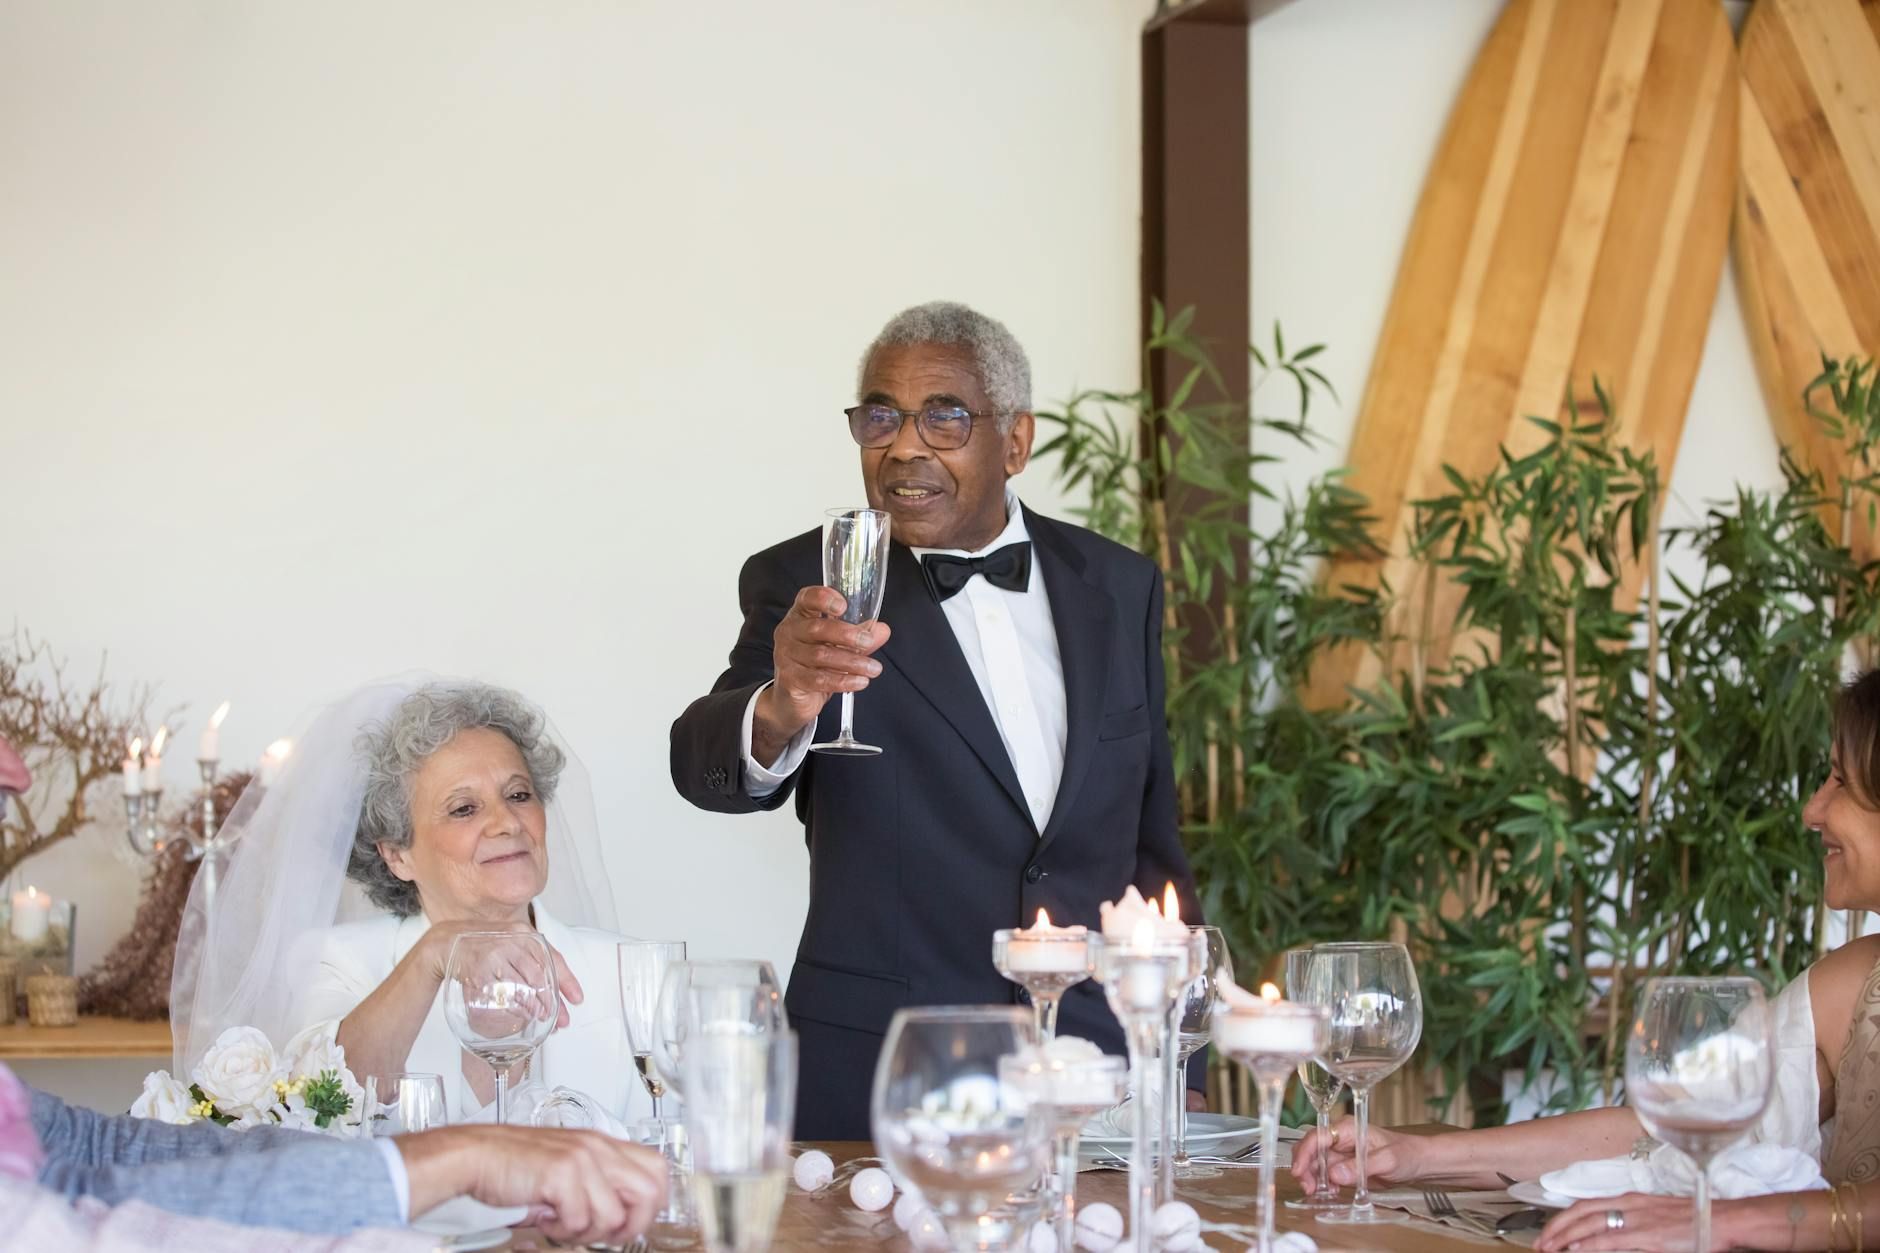 A groom encouraging a toast in front of their guests that's enjoying the beverages in their wedding.